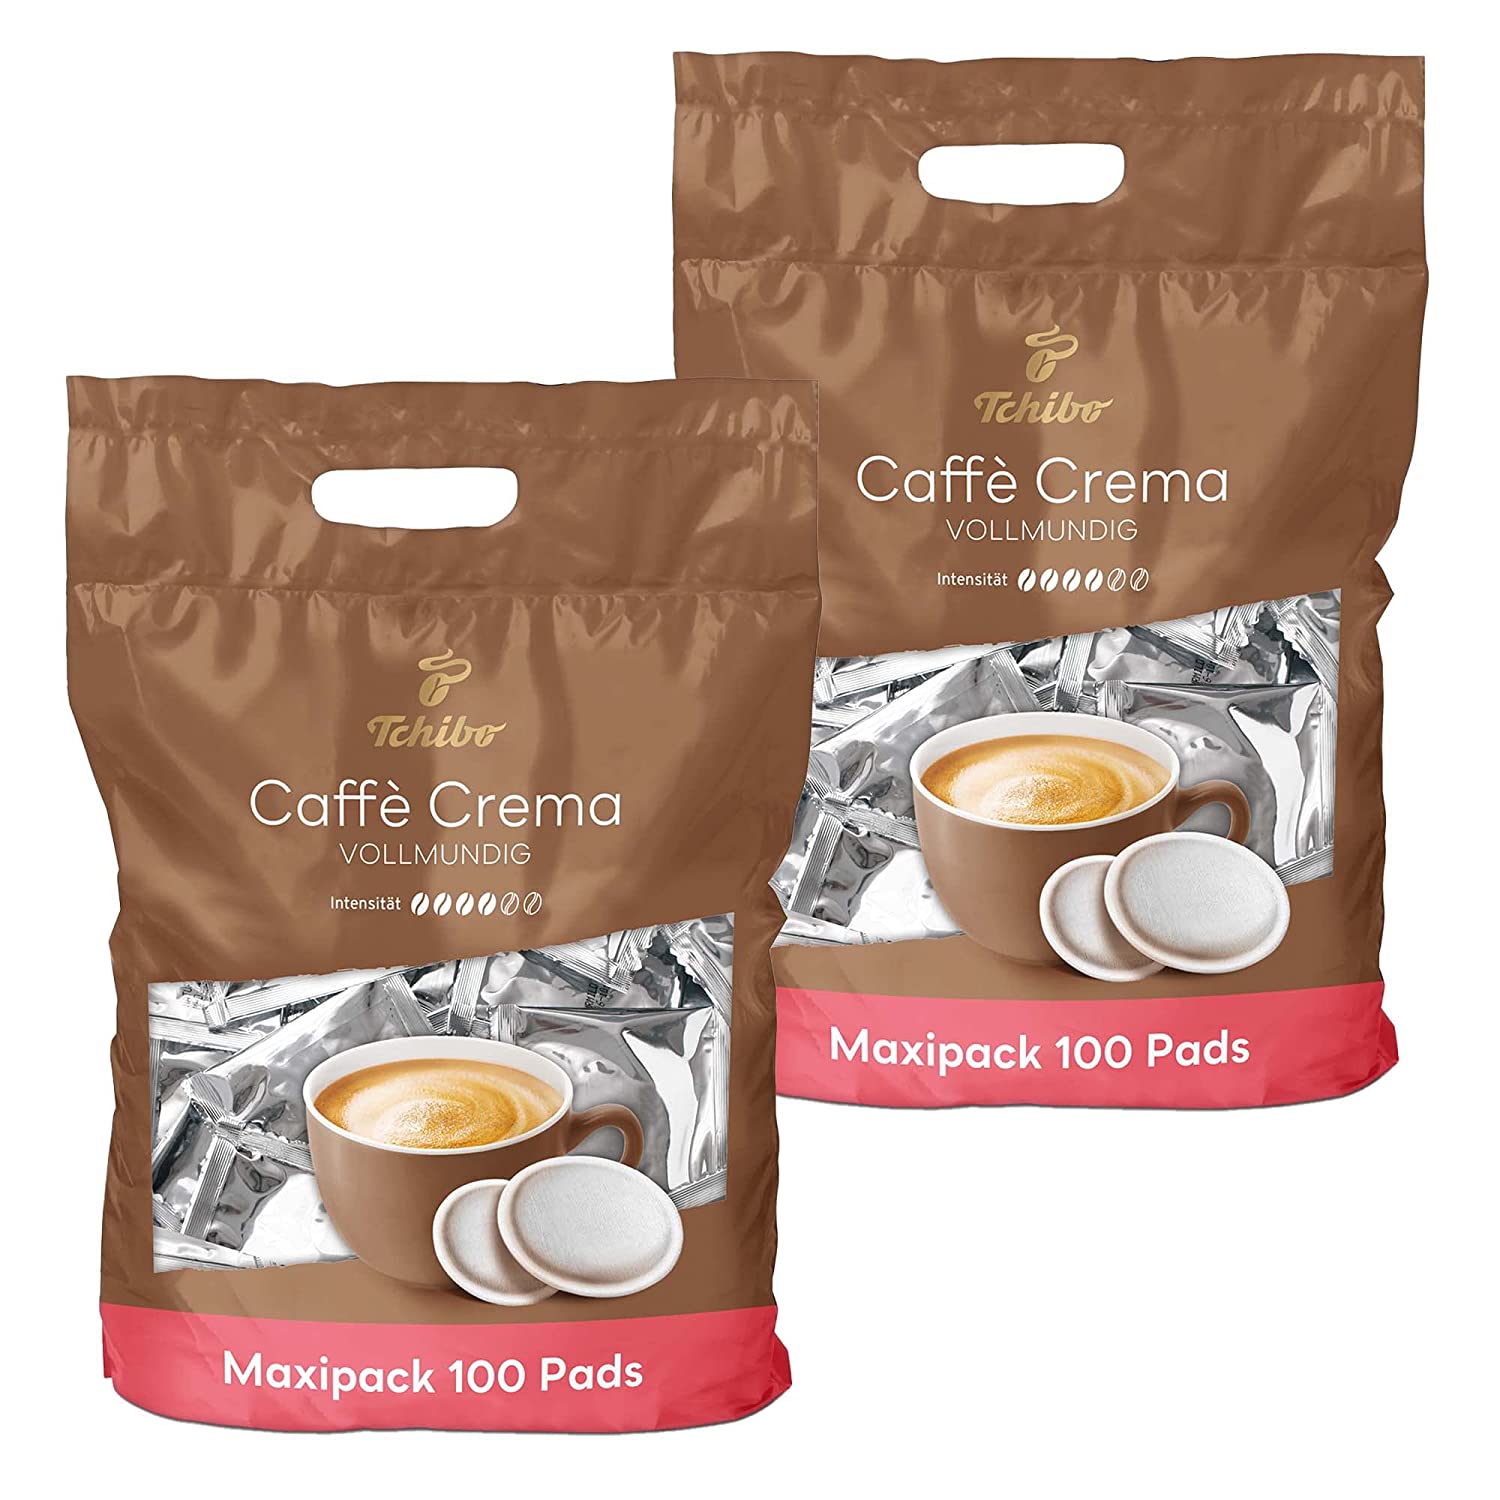 Tchibo Maxipack, Caffè Crema full-bodied, 200 pieces – 2x 100 pads (coffee, balanced and full-bodied), sustainable, suitable for Senseo machines